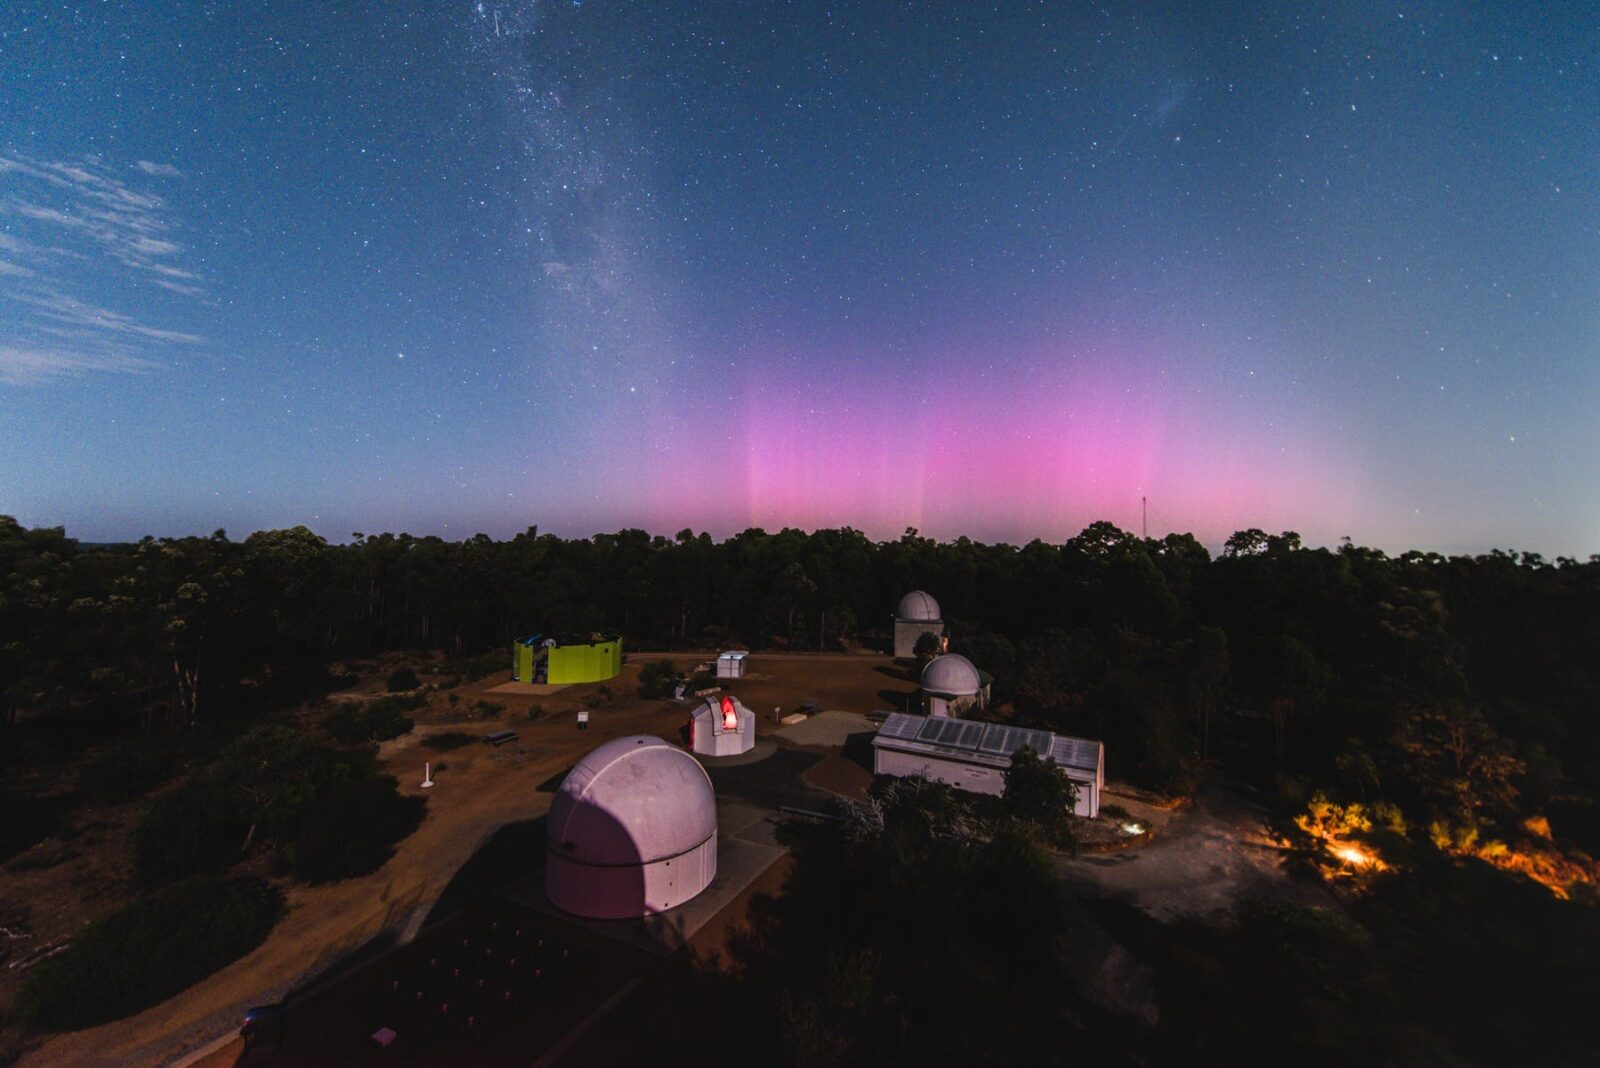 The Aurora Australis from the Perth Observatory